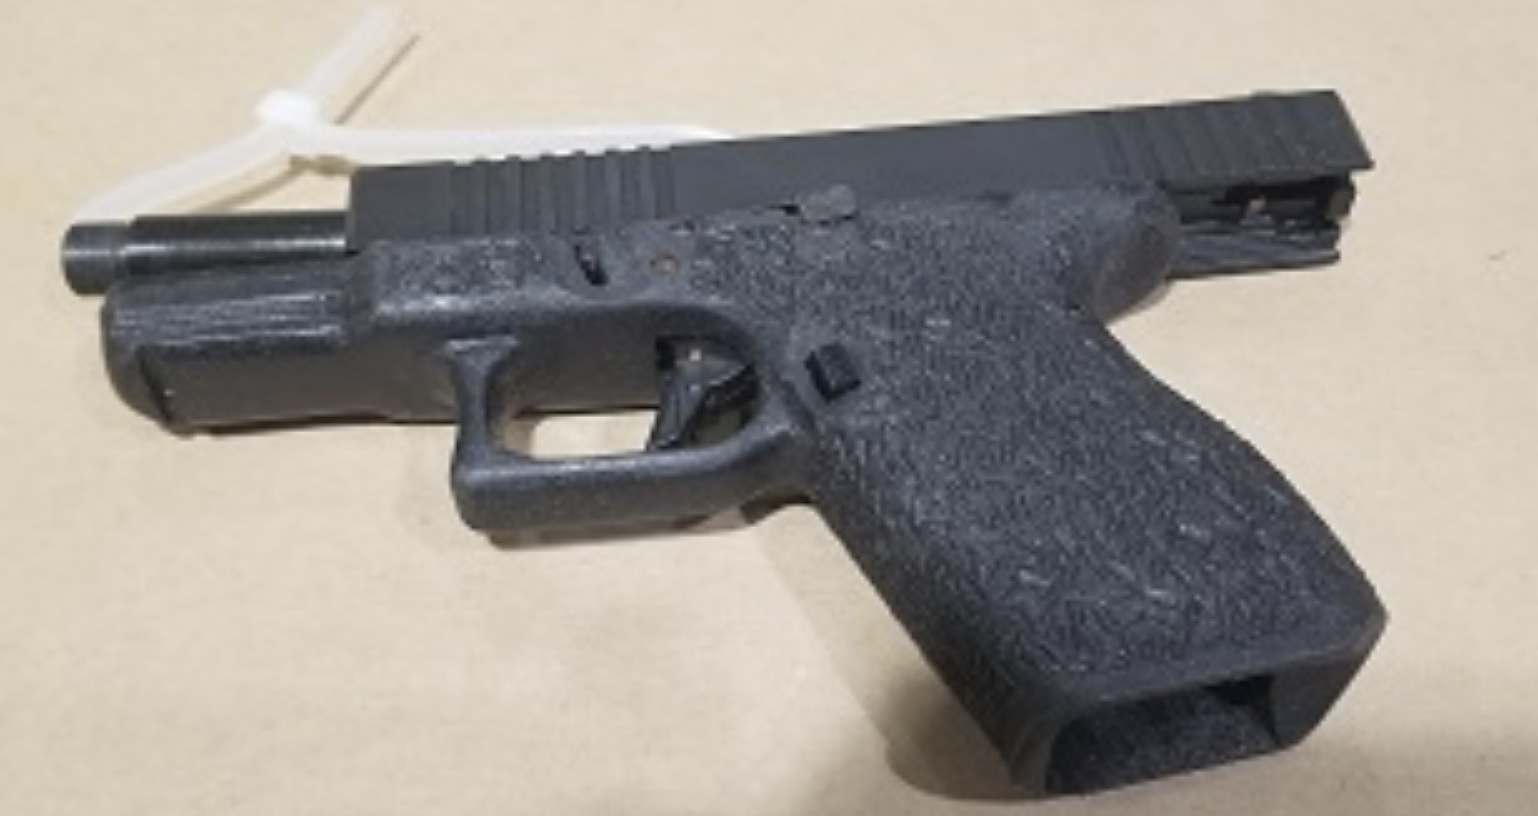 Gang enforcement team arrest 21 year old with loaded firearm and jerrycan